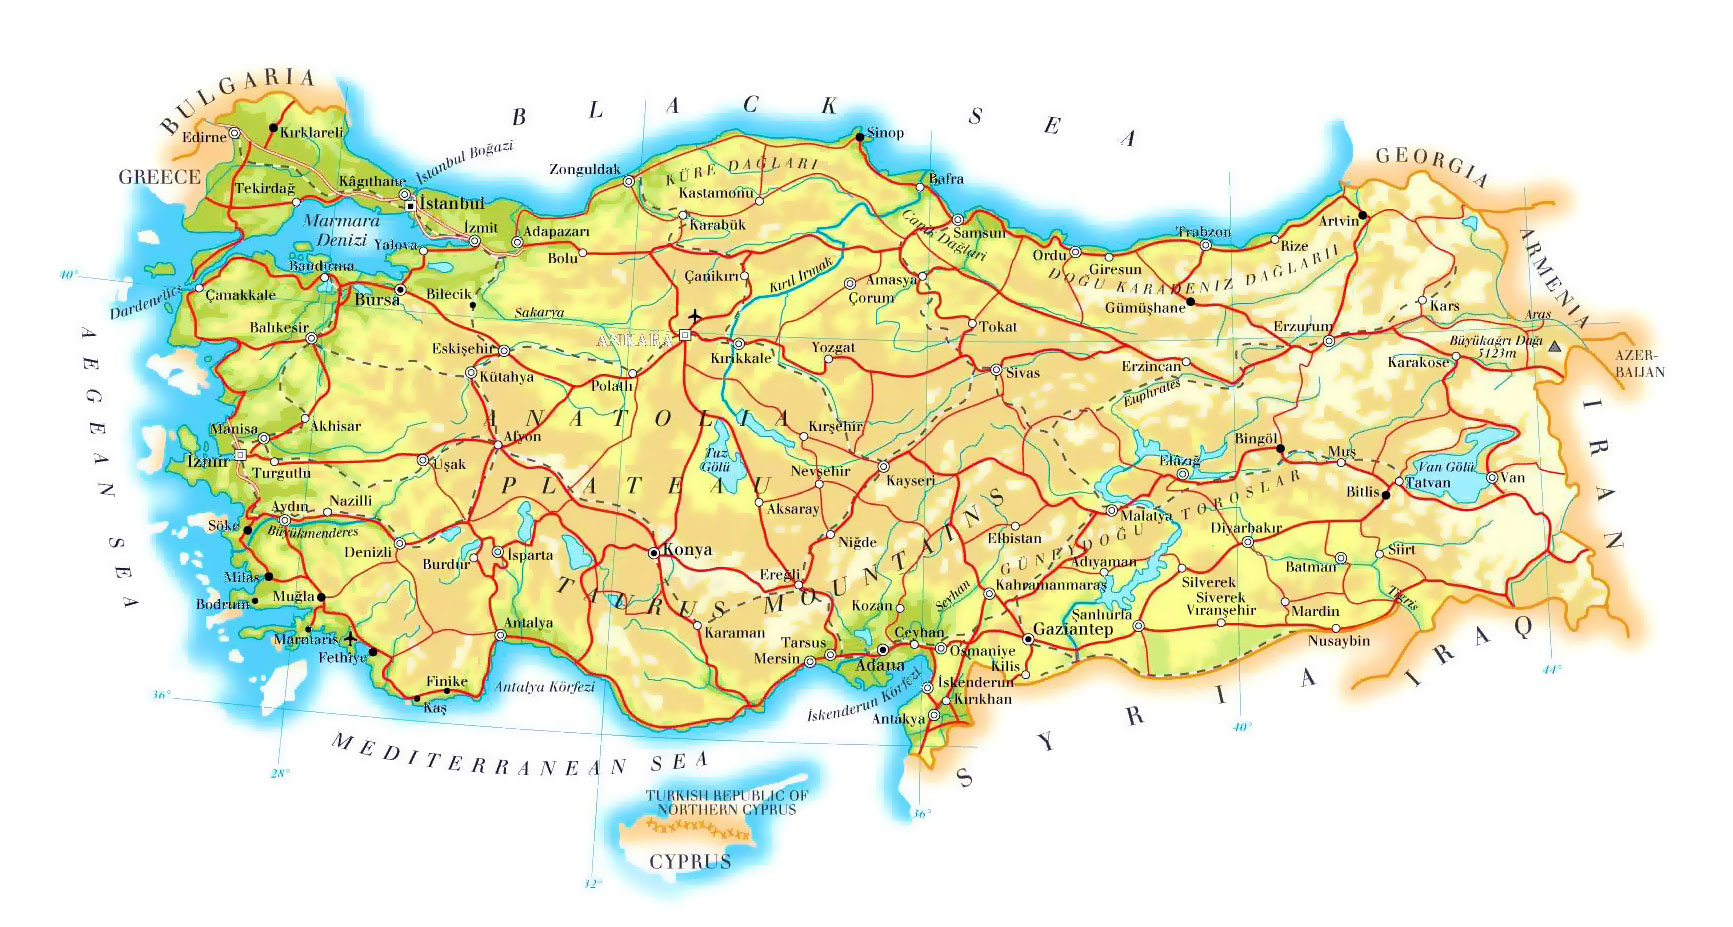 Turkey Geography Map | Steven Andrew Martin | Istanbul webpage | Professor Dr Steven A Martin Learning Adventures